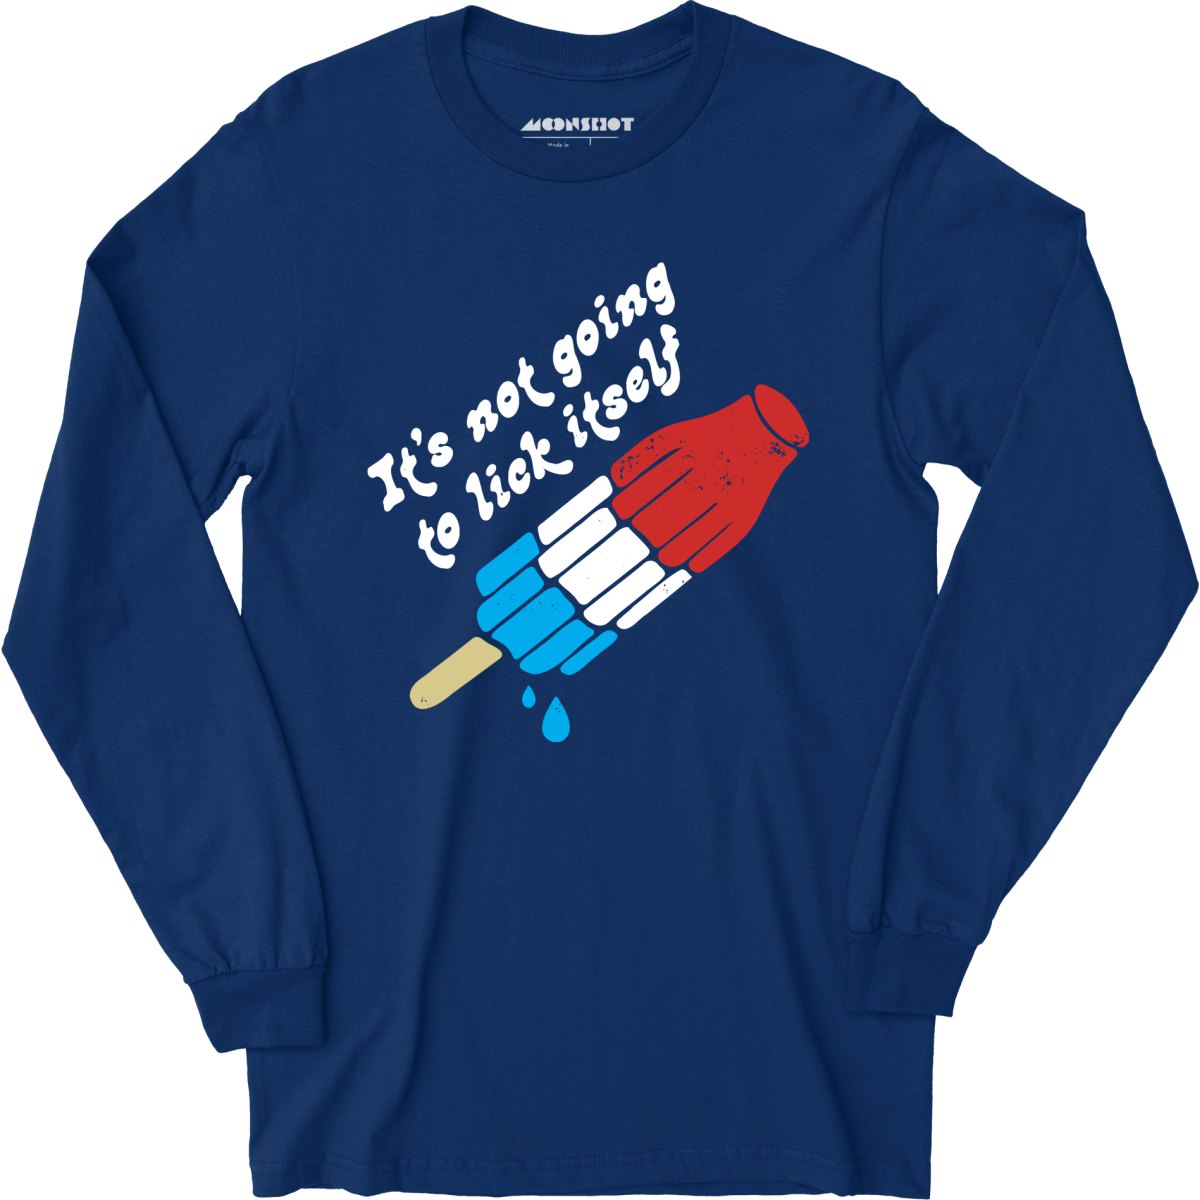 It's Not Going to Lick Itself - Long Sleeve T-Shirt